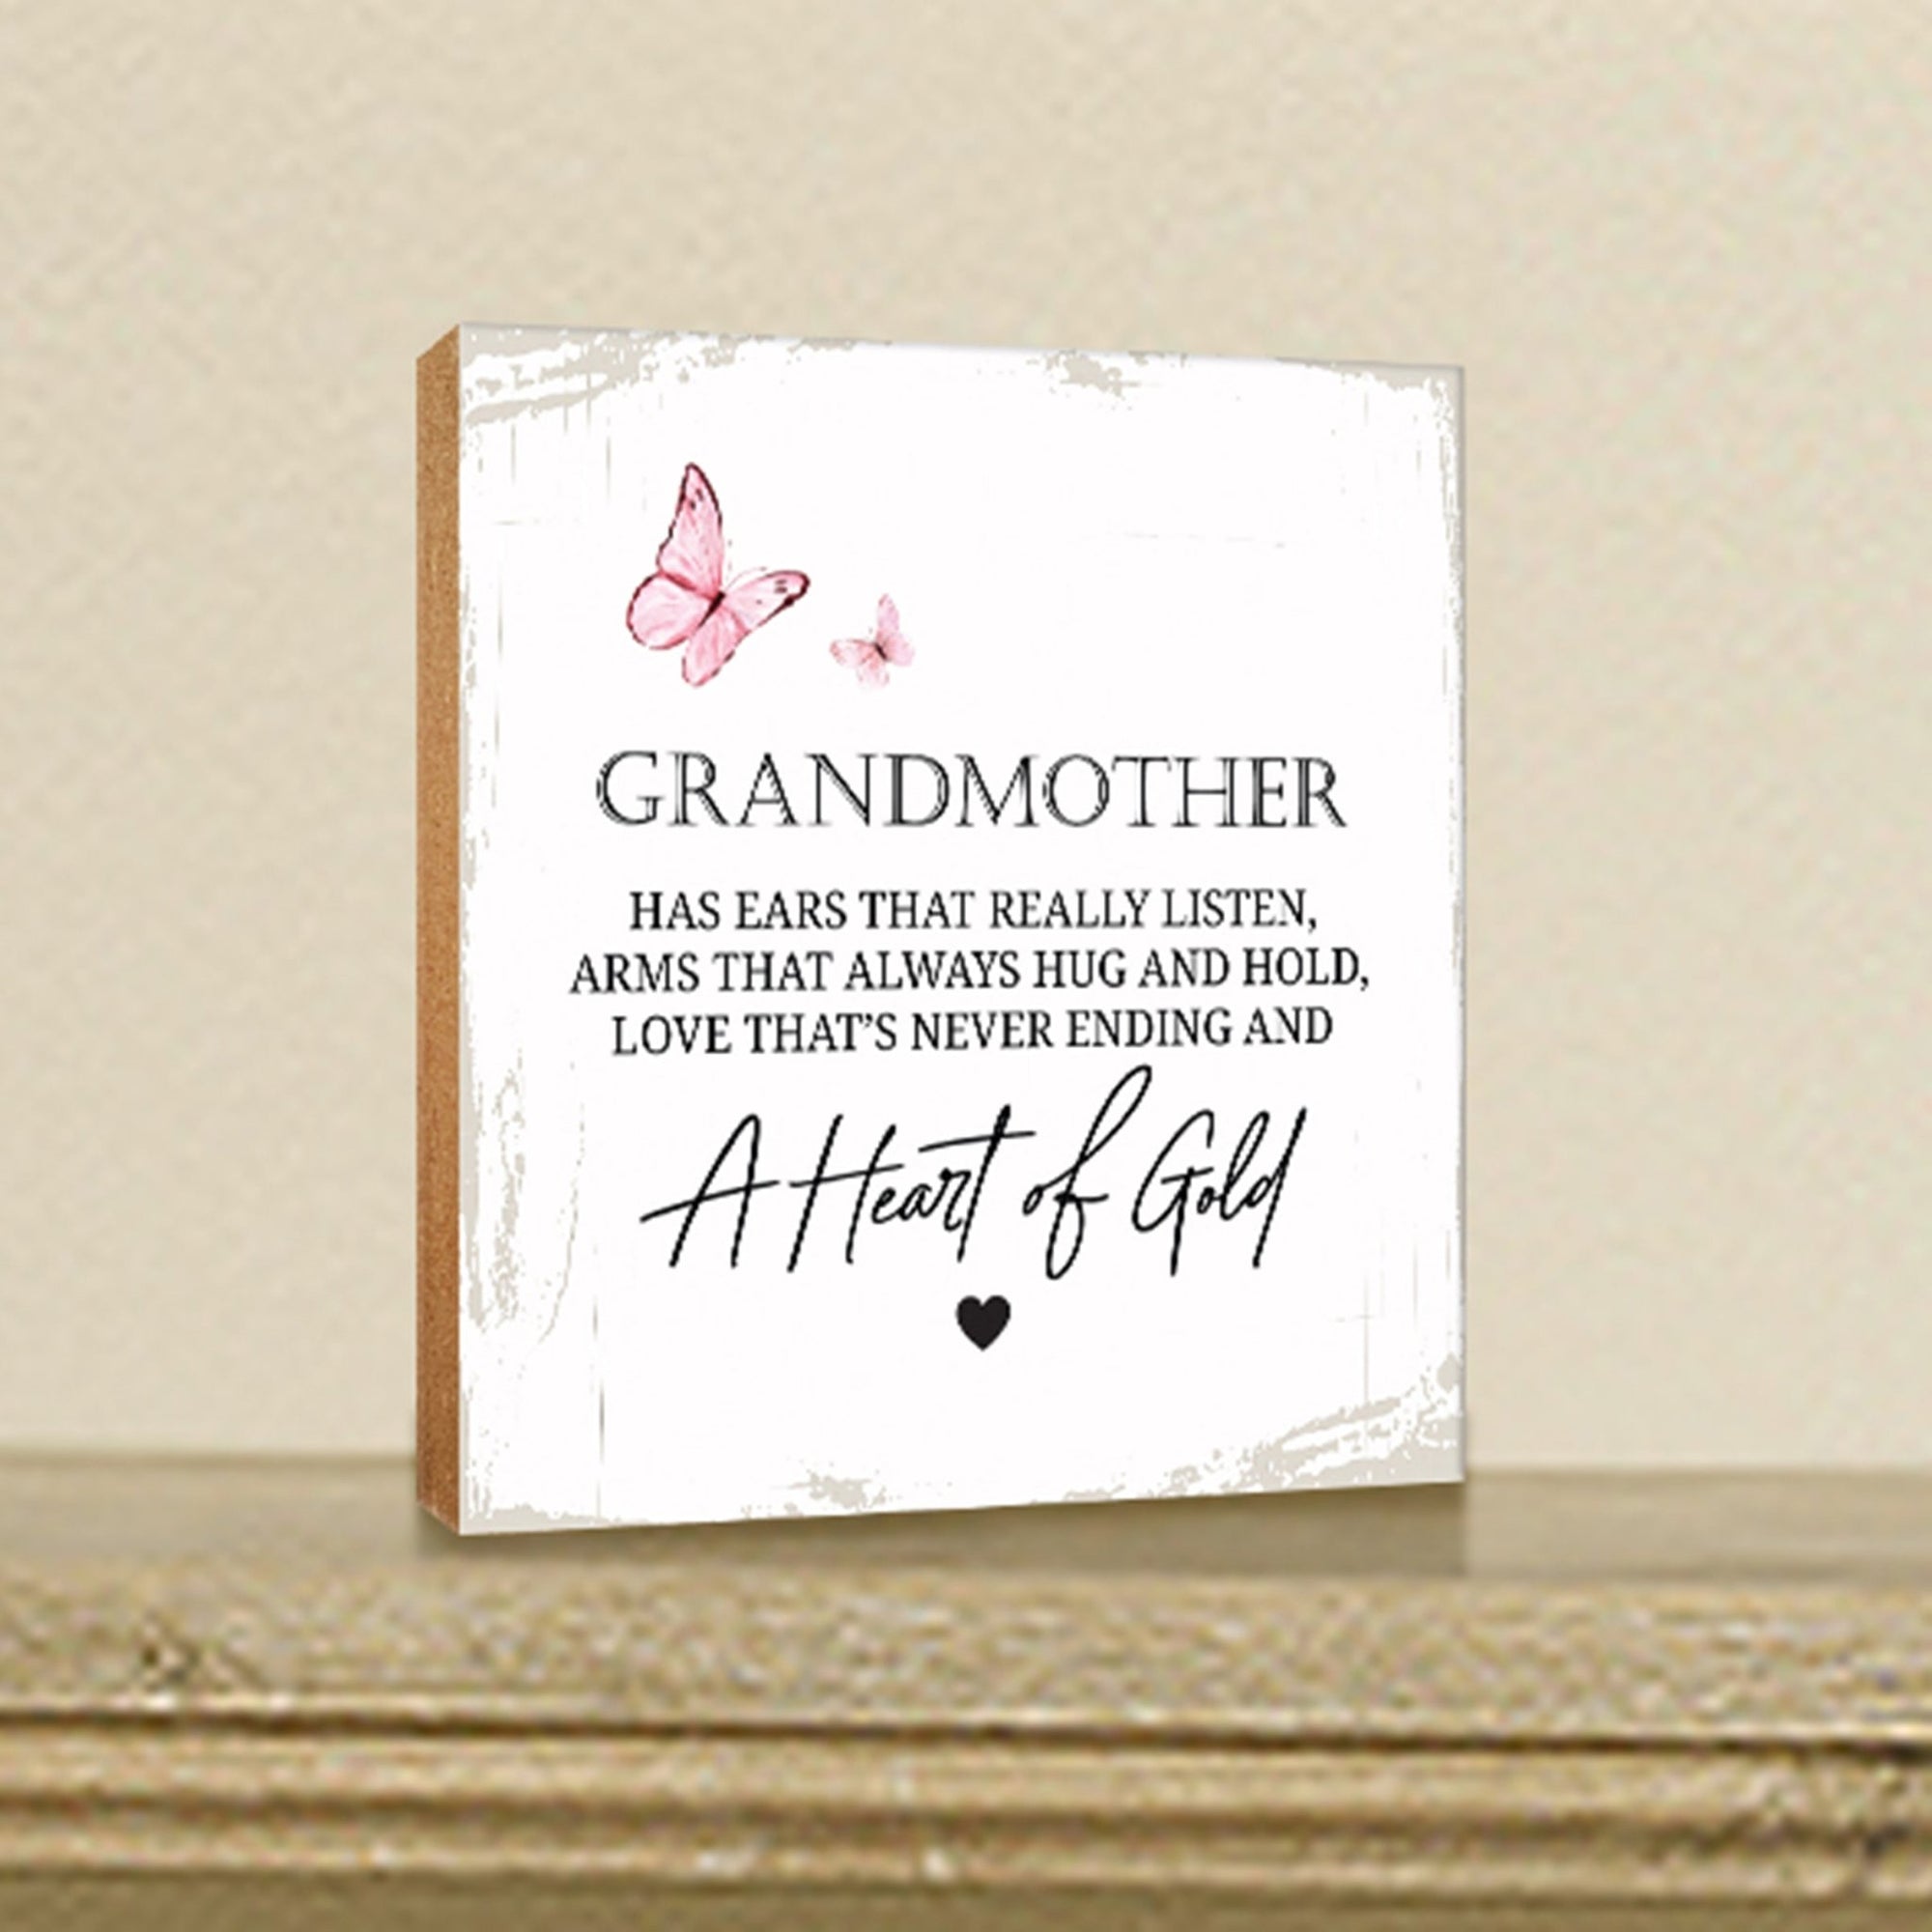 Grandmother Has Ears Floral 6x6 Inches Wood Family Art Sign Tabletop and Shelving For Home Décor - LifeSong Milestones